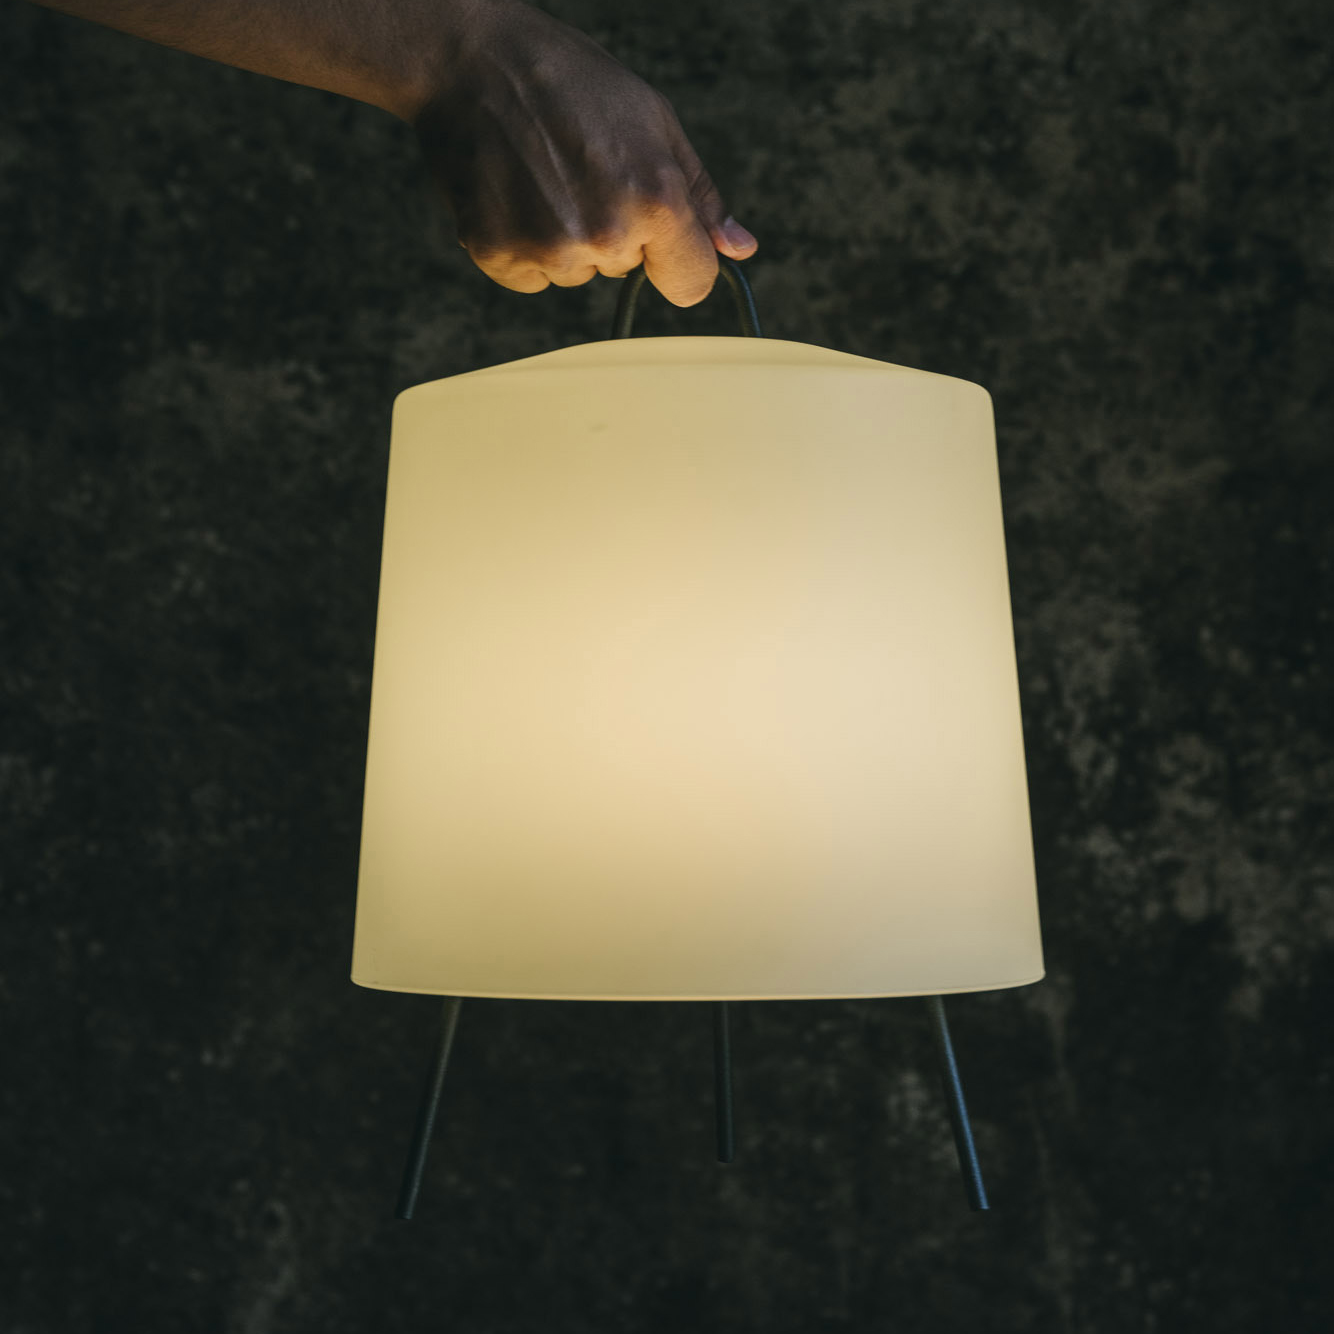 Kettal Living Objects Mia Table Lamp S, Mia Table Lamp Kettal